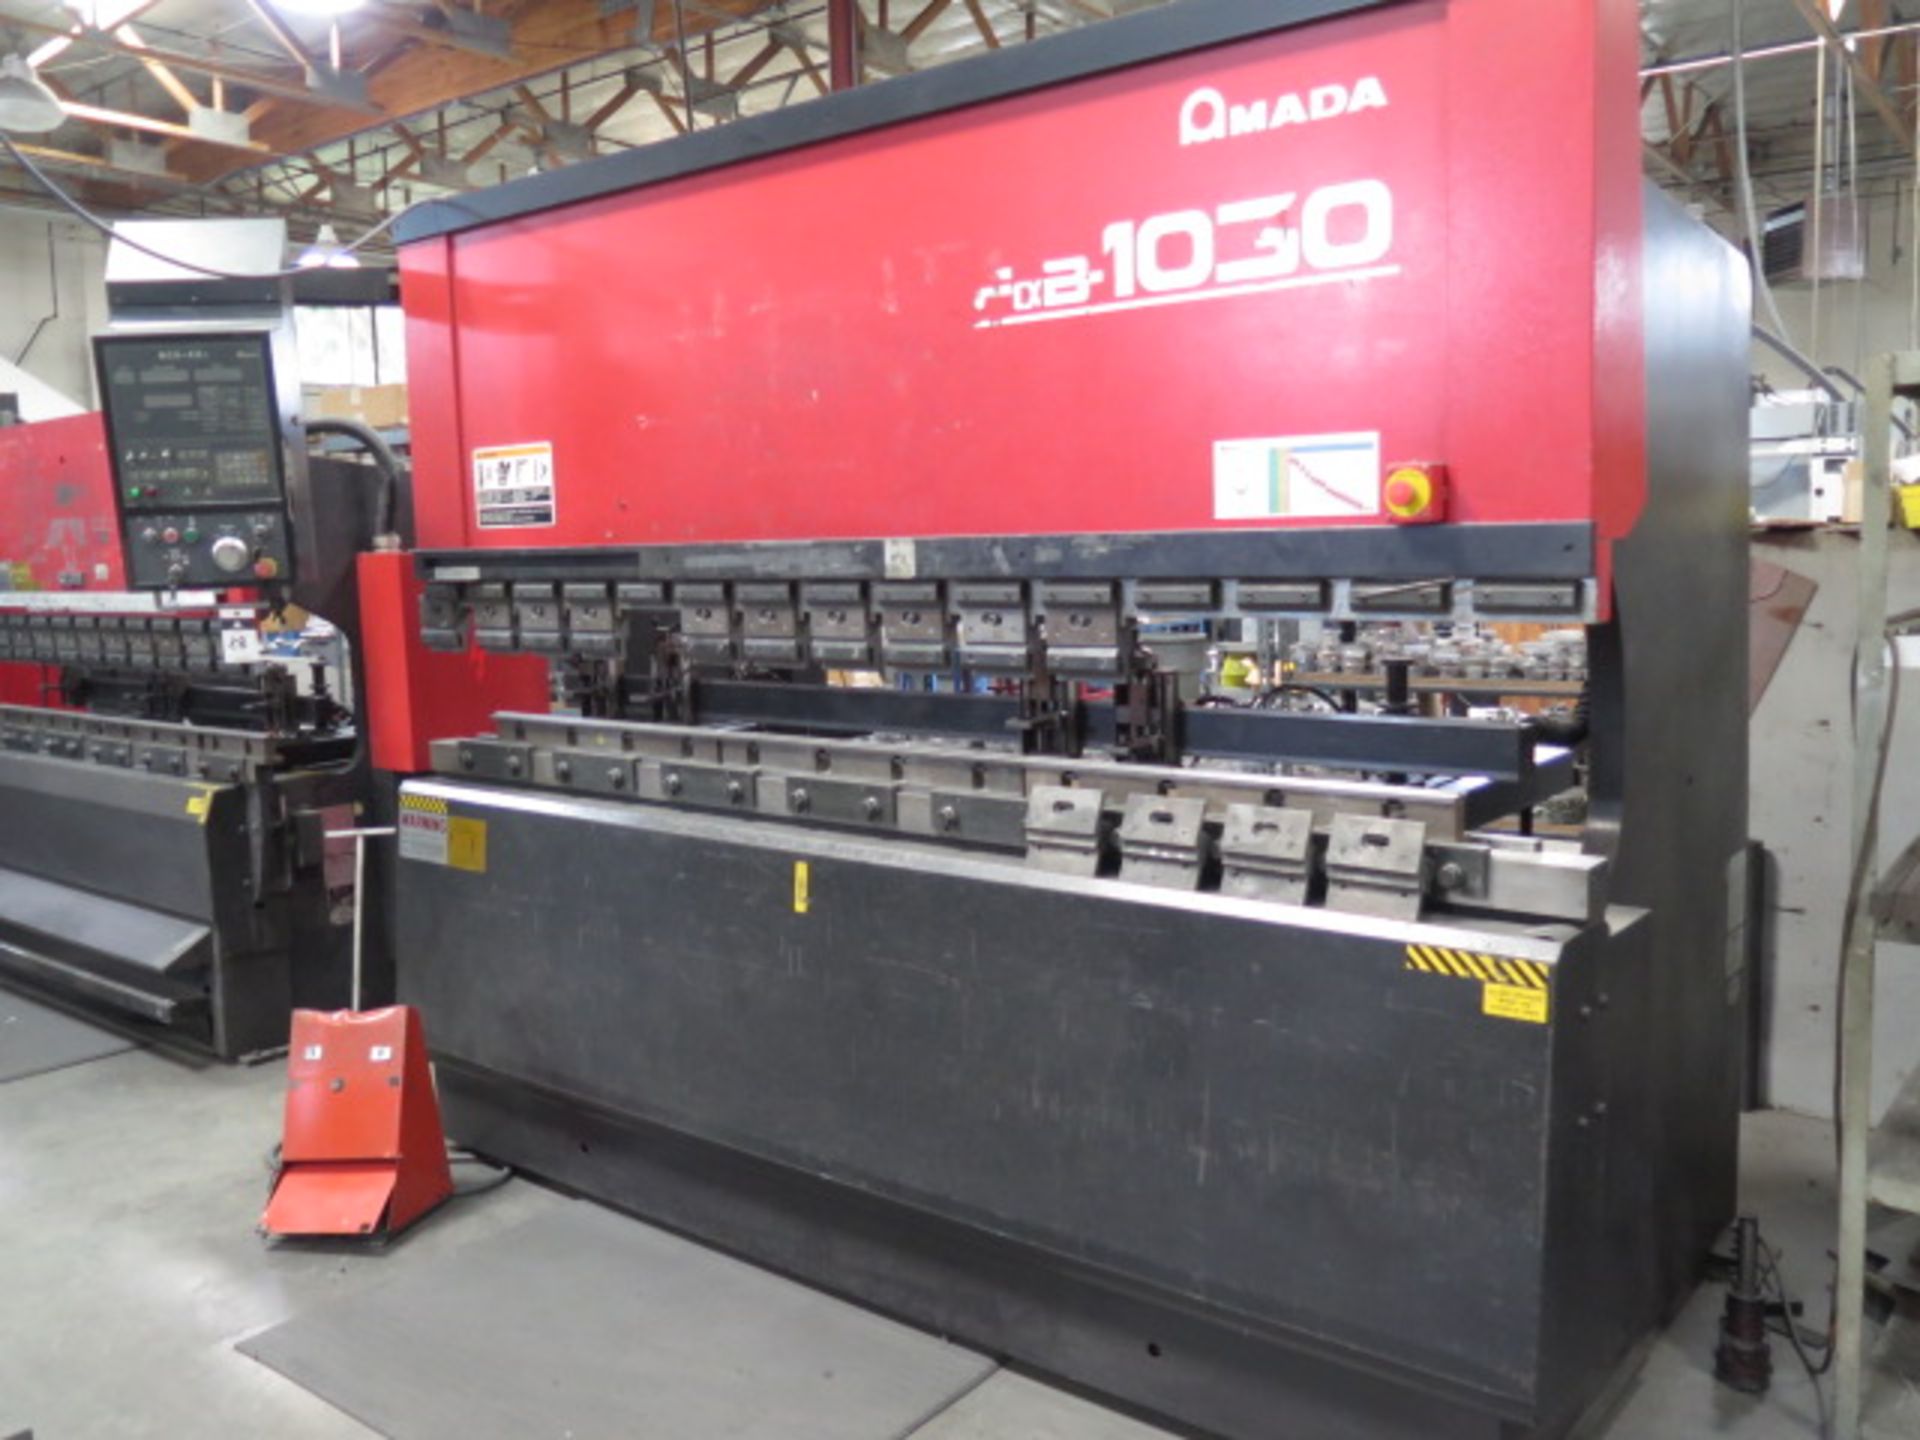 Amada FBD-1030E 100 Ton x 10’ CNC Press Brake s/n 1030518 w/ NC9-EX II, 118.1” Table, SOLD AS IS - Image 2 of 13